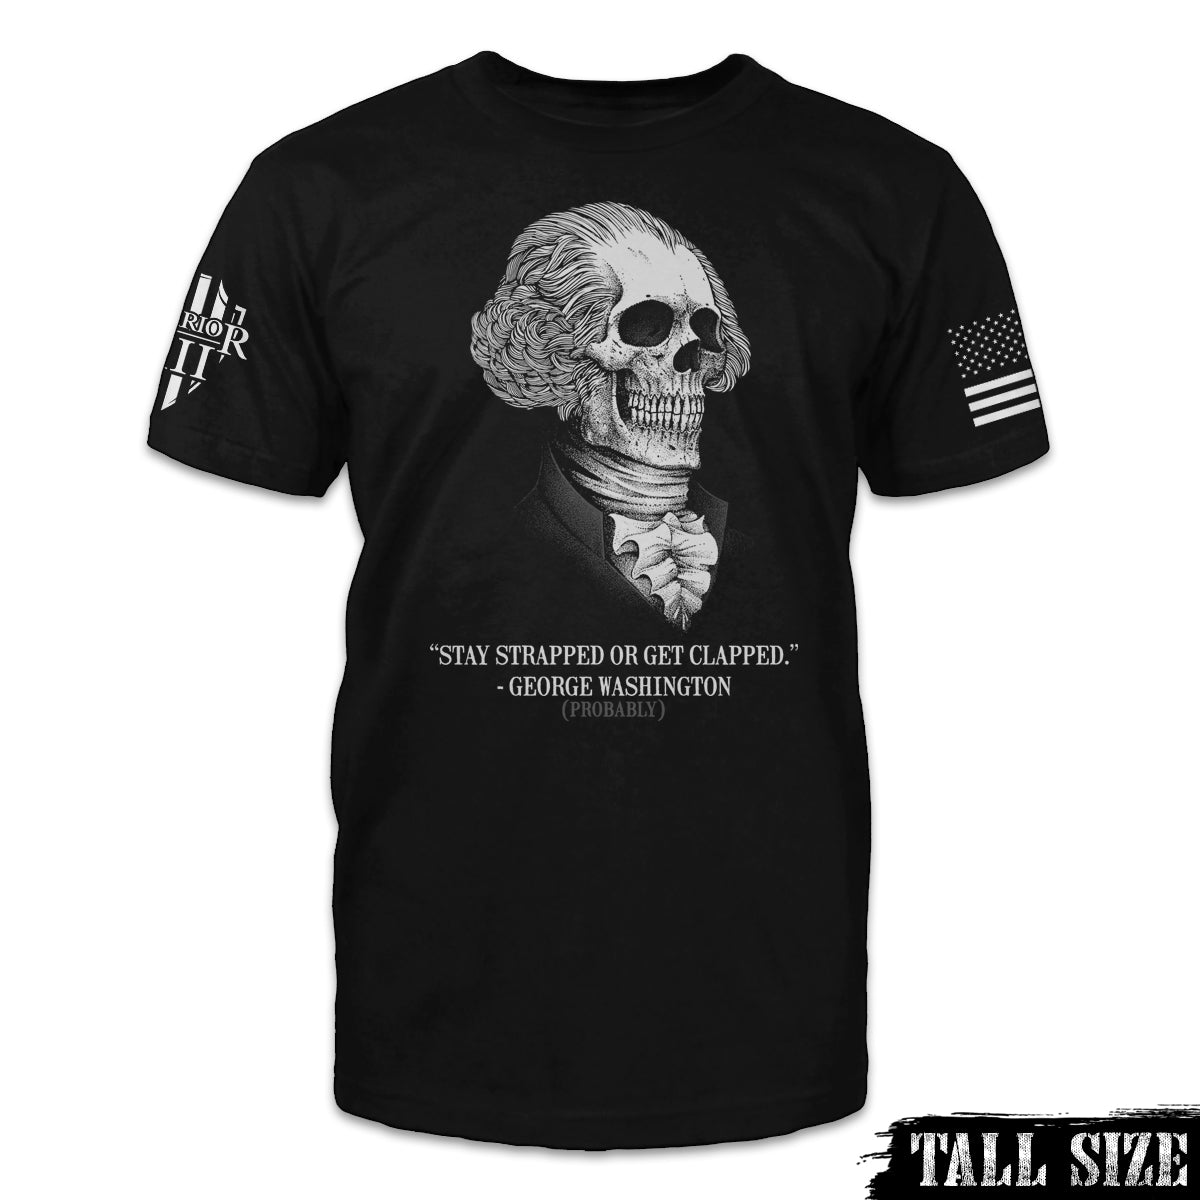 A black tall size shirt with the words "Stay strapped, or get clapped." - George Washington (probably)" and a George Washington skull.